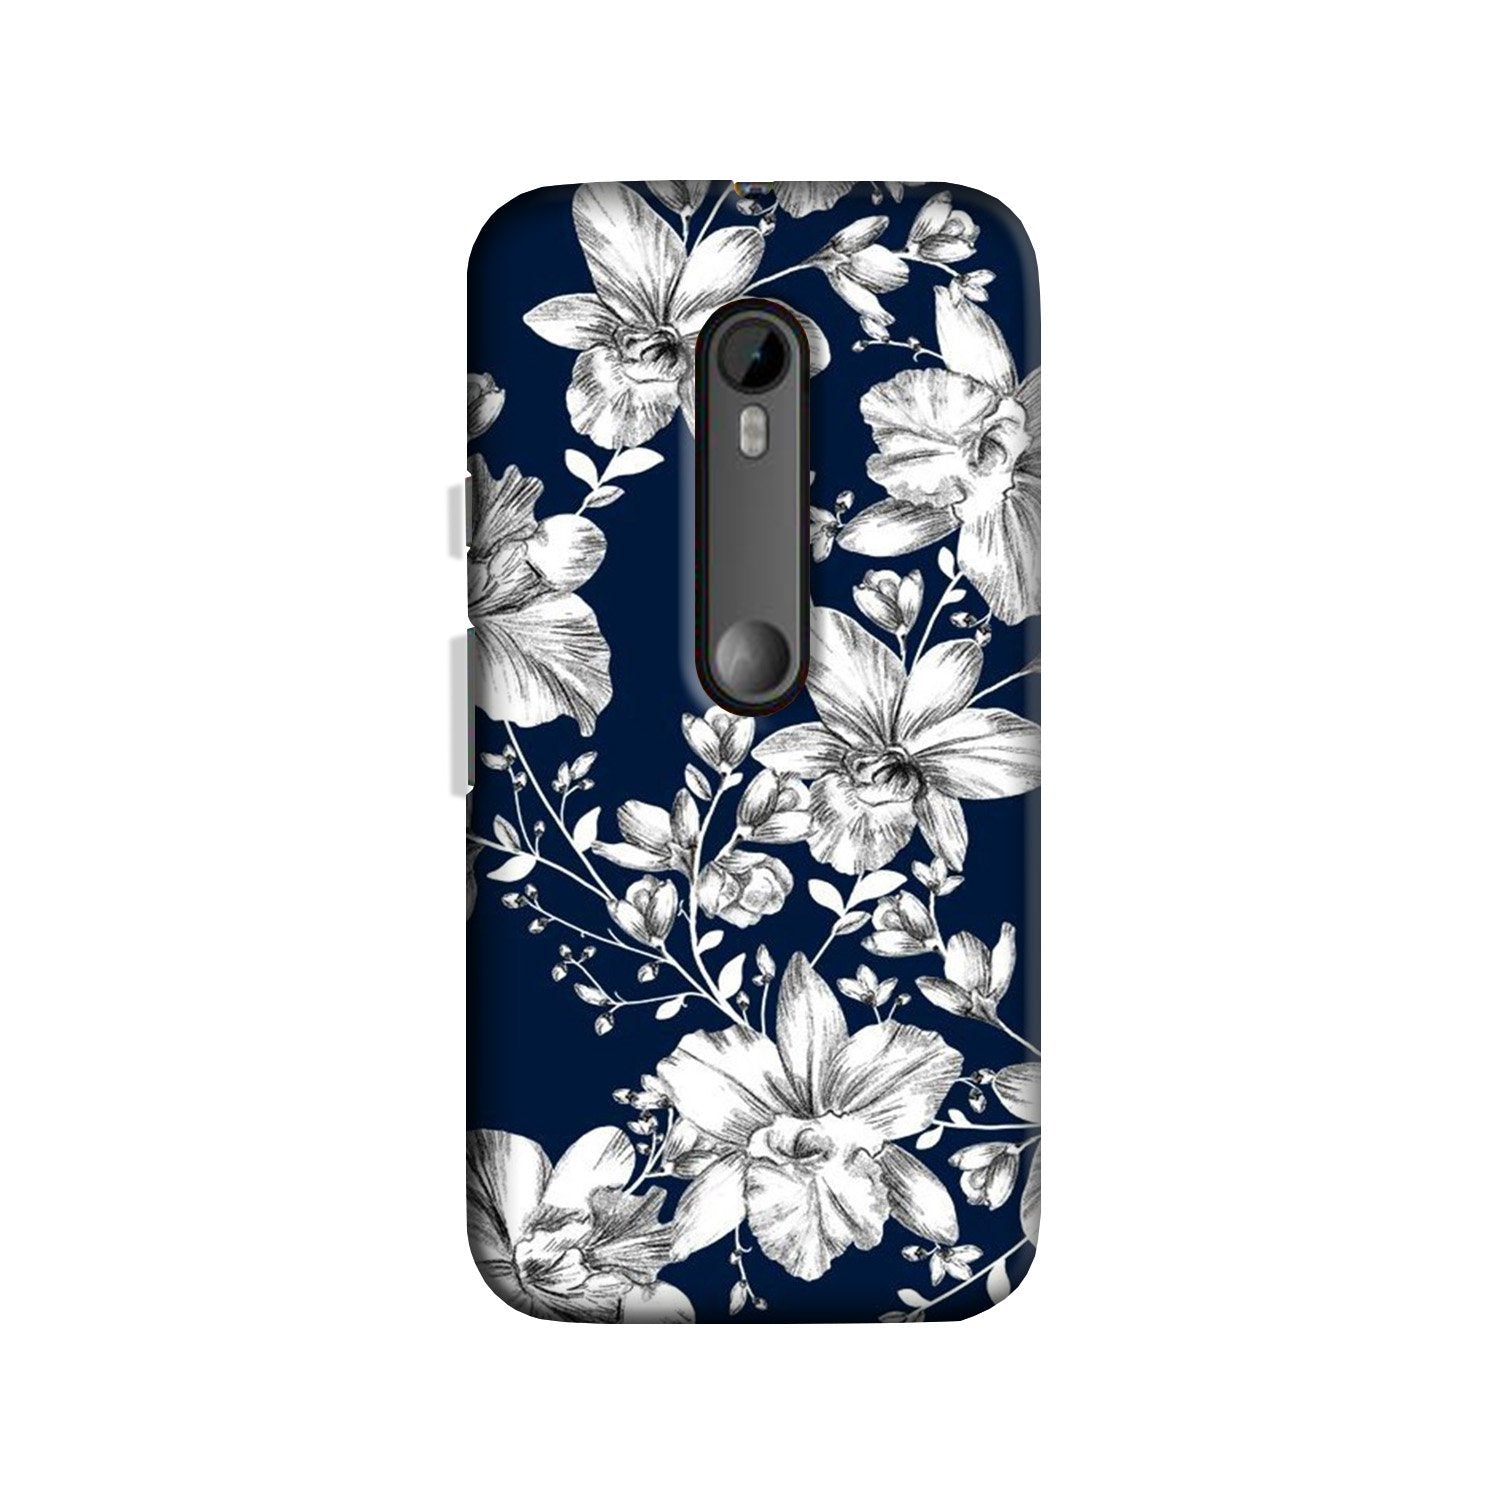 White flowers Blue Background Case for Moto X Force